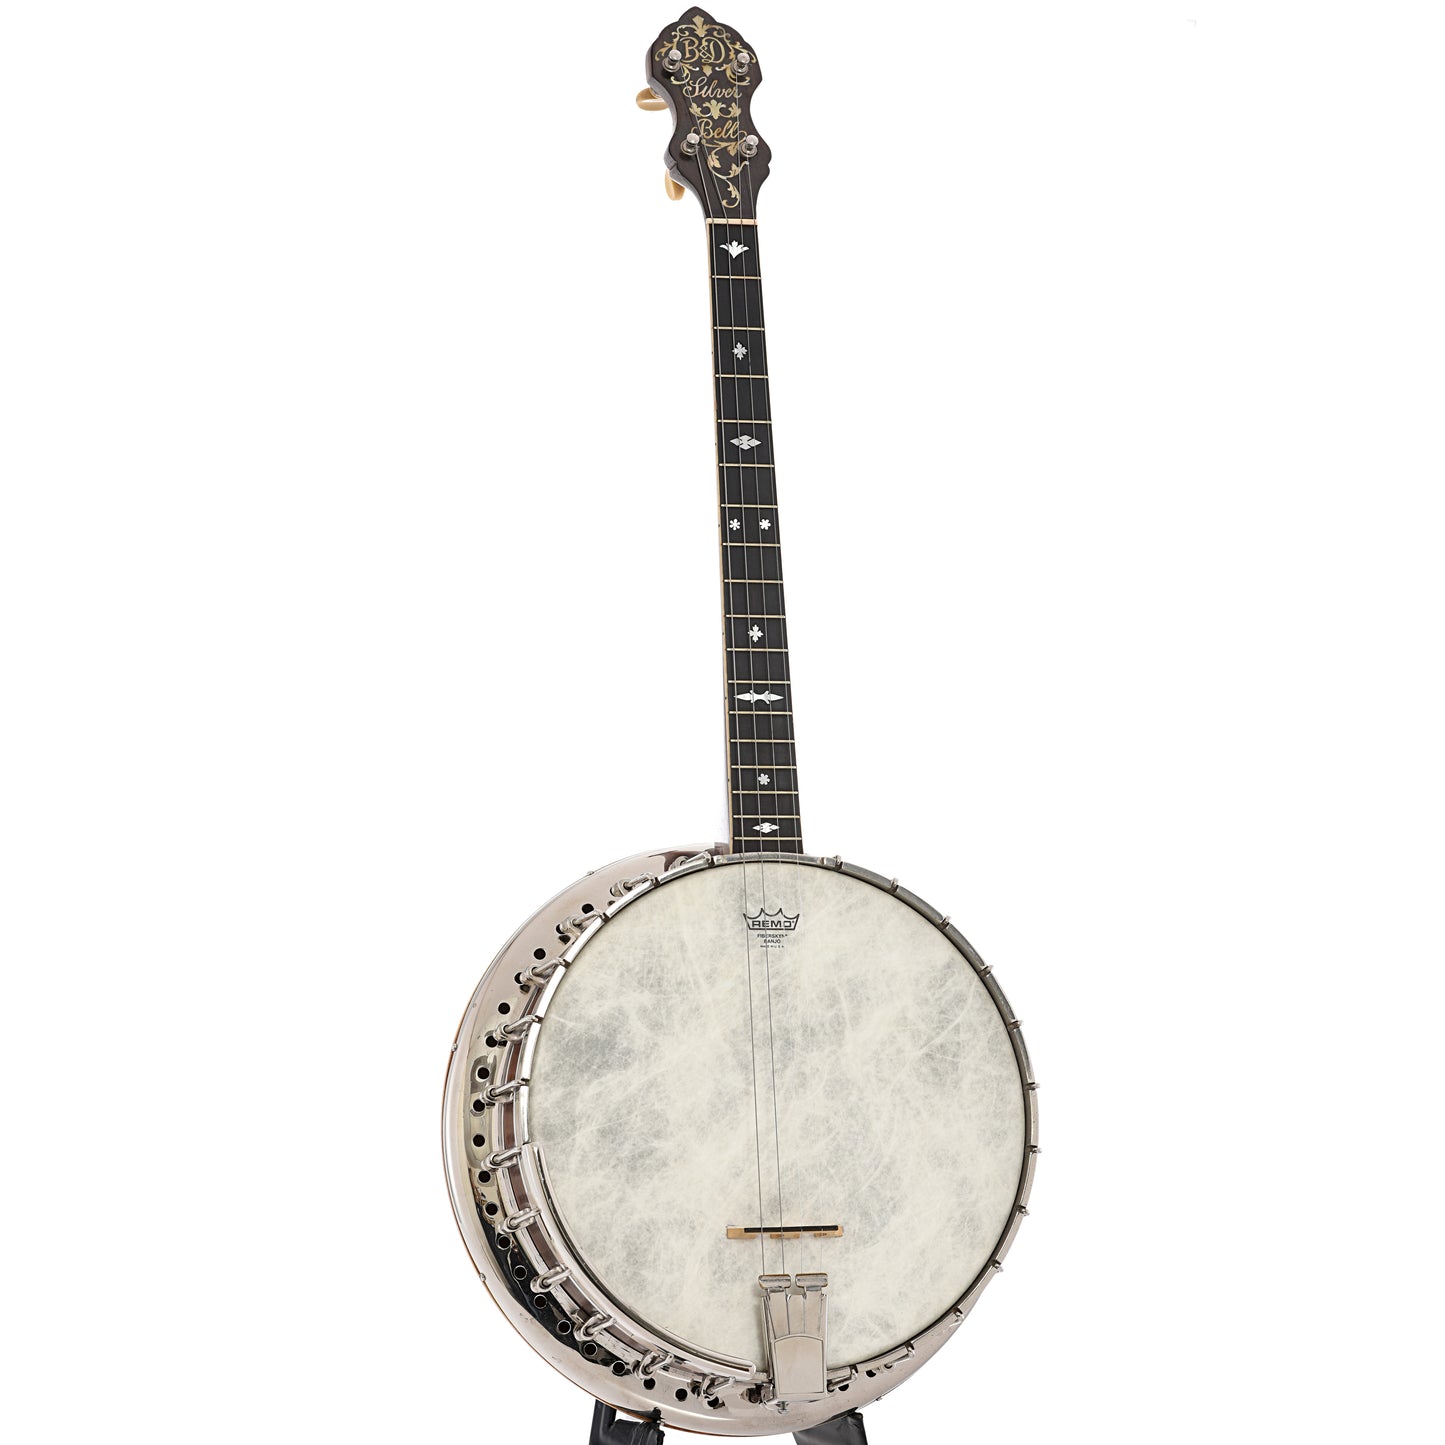 Full front and side of Bacon & Day Silver Bell No.1 Tenor Banjo (c.1923)